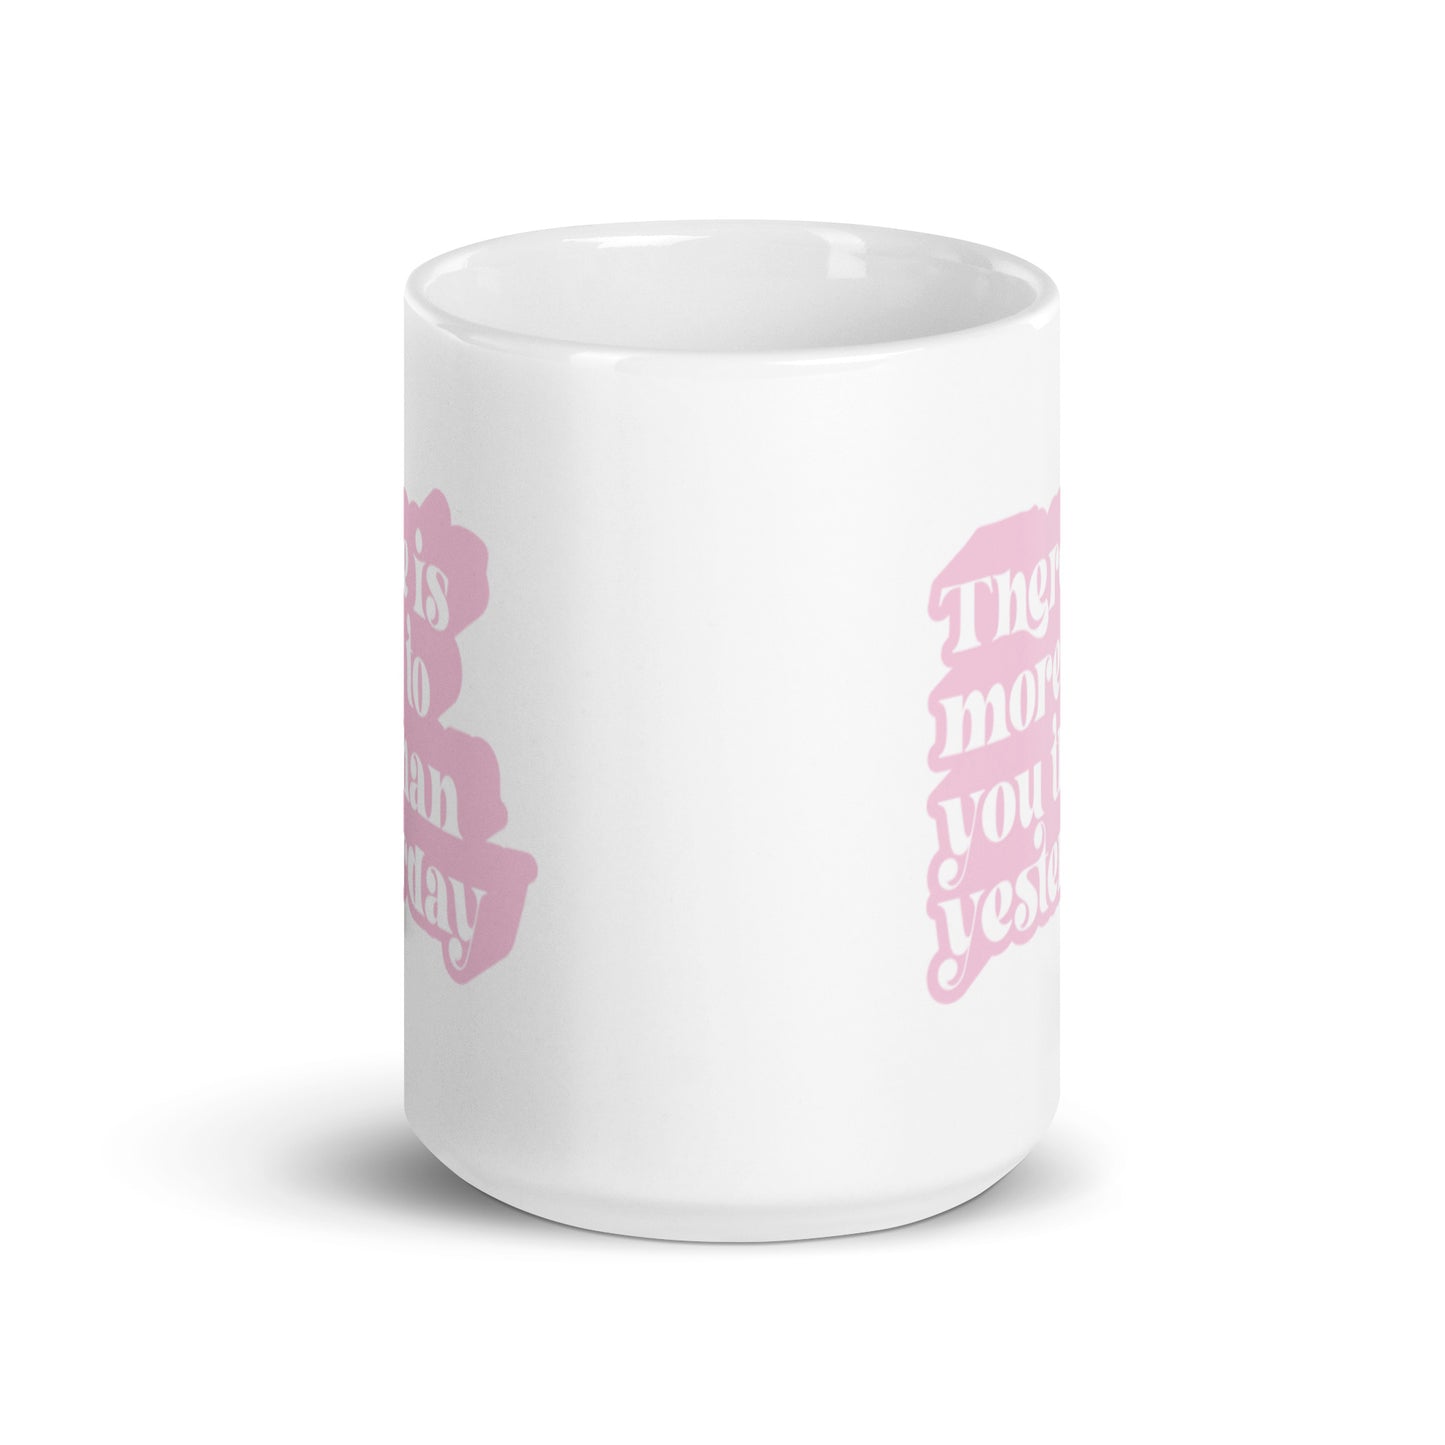 There is More to You Than Yesterday XL White Glossy Mug (15oz)